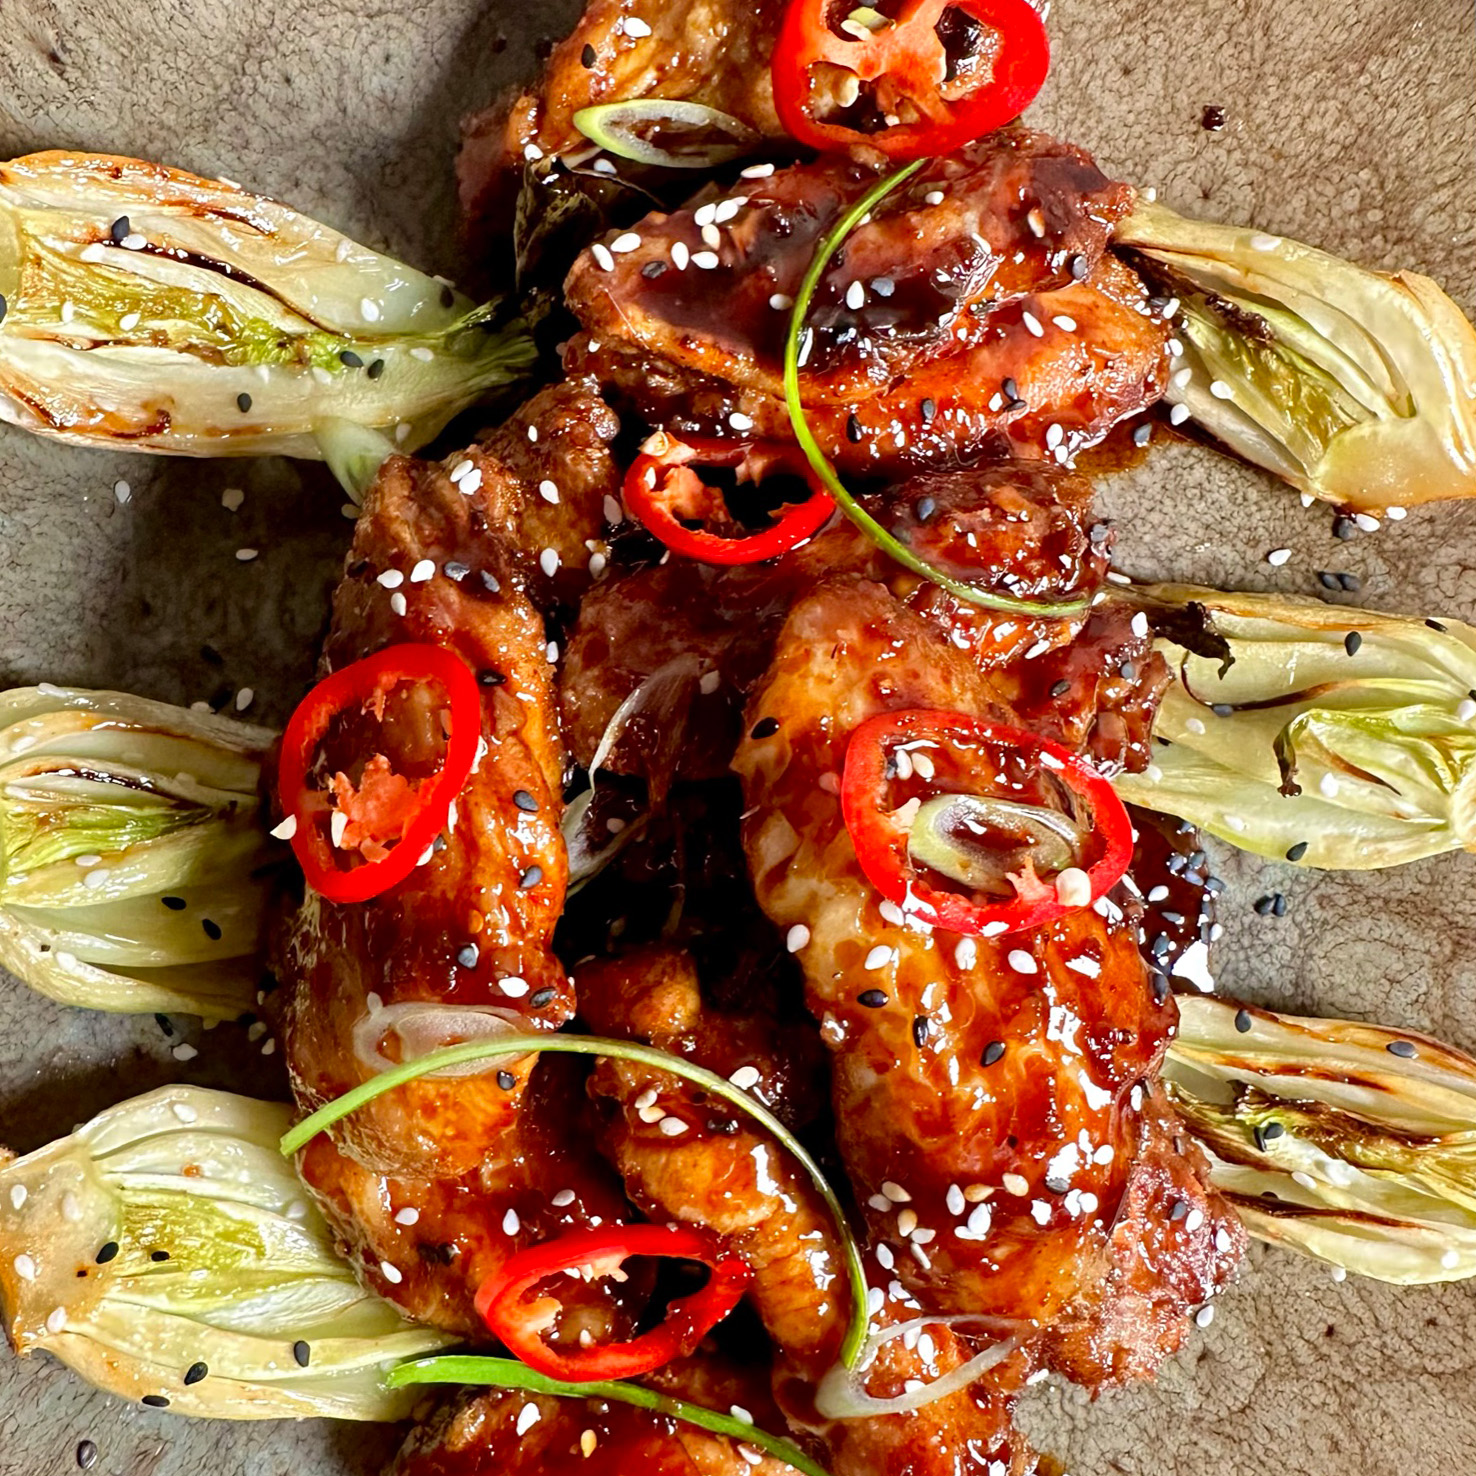 https://www.smokeandsear.world/wp-content/uploads/2022/12/Ninja-Woodfire-Asian-Style-Sweet-and-Sticky-Chicken-Wings-with-Air-Fried-Pak-Choi-Photo-15.jpg